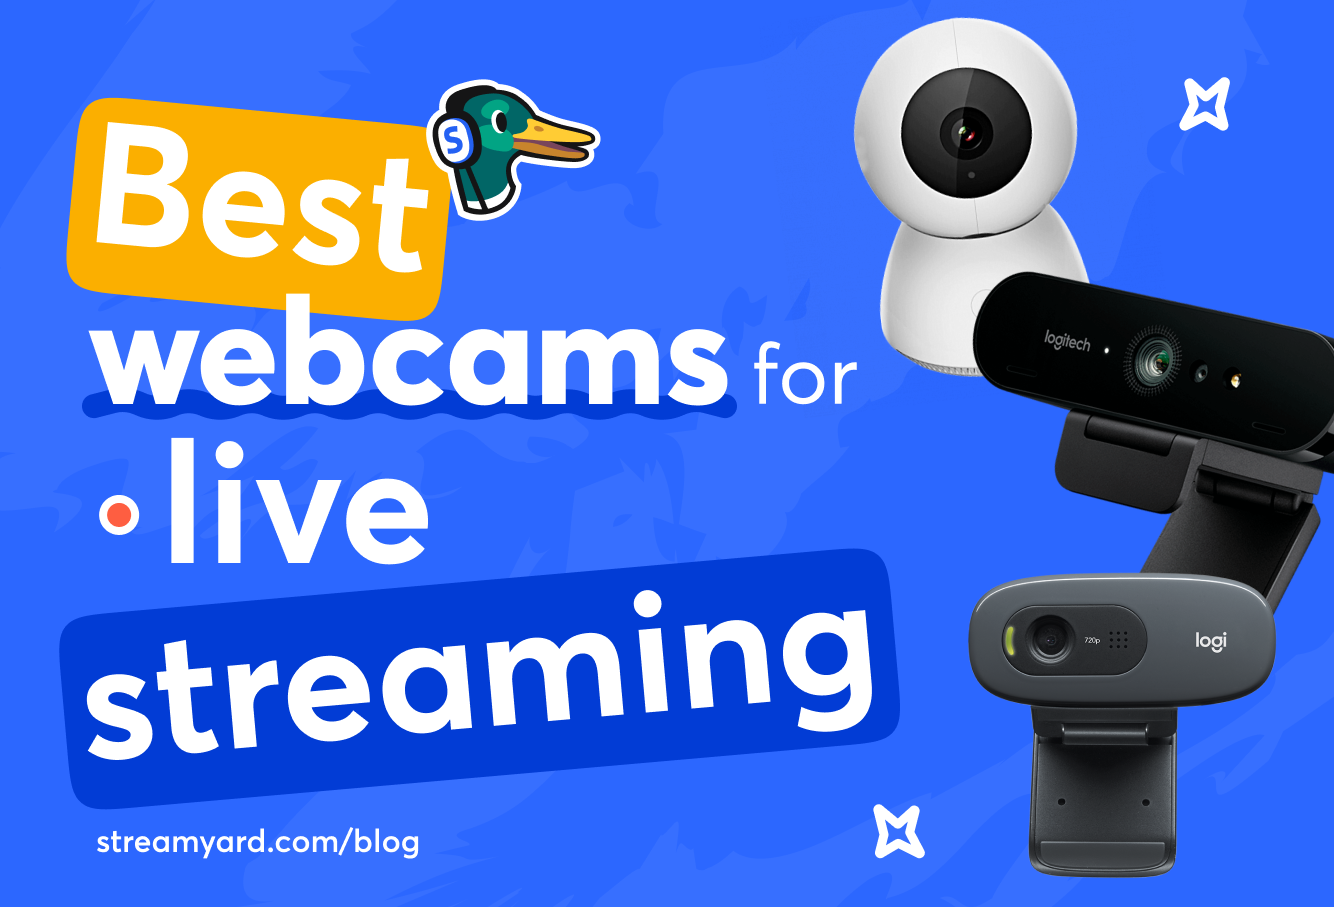 Best streaming webcam you can get rn 🙌 #streamingtips